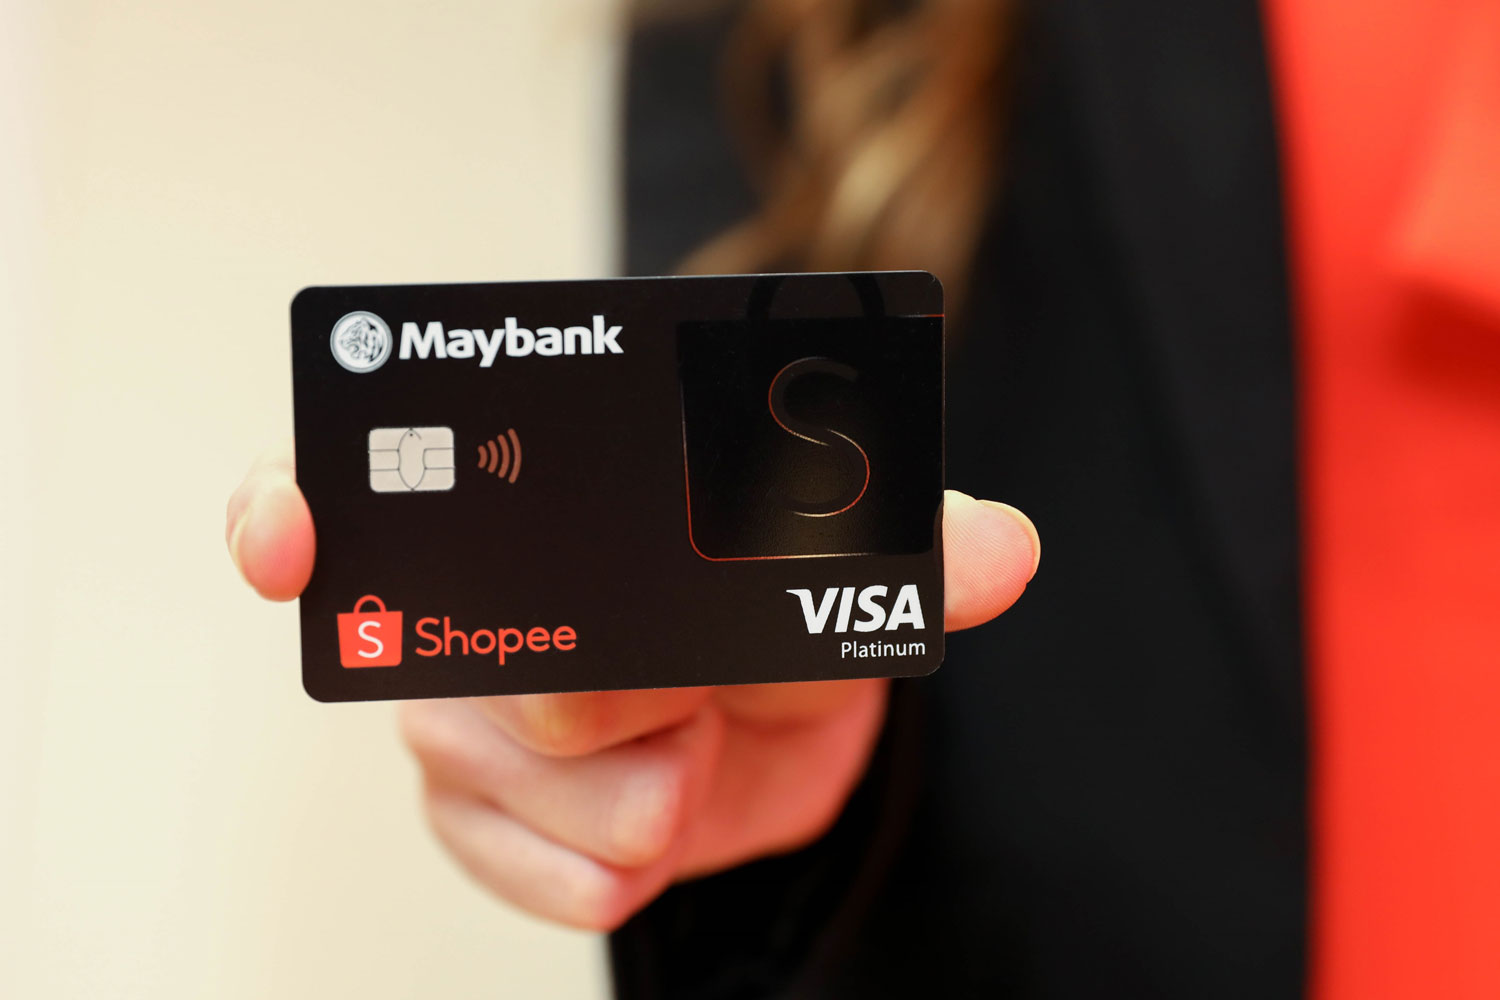 Get More Goodies with Maybank Shopee Credit Card